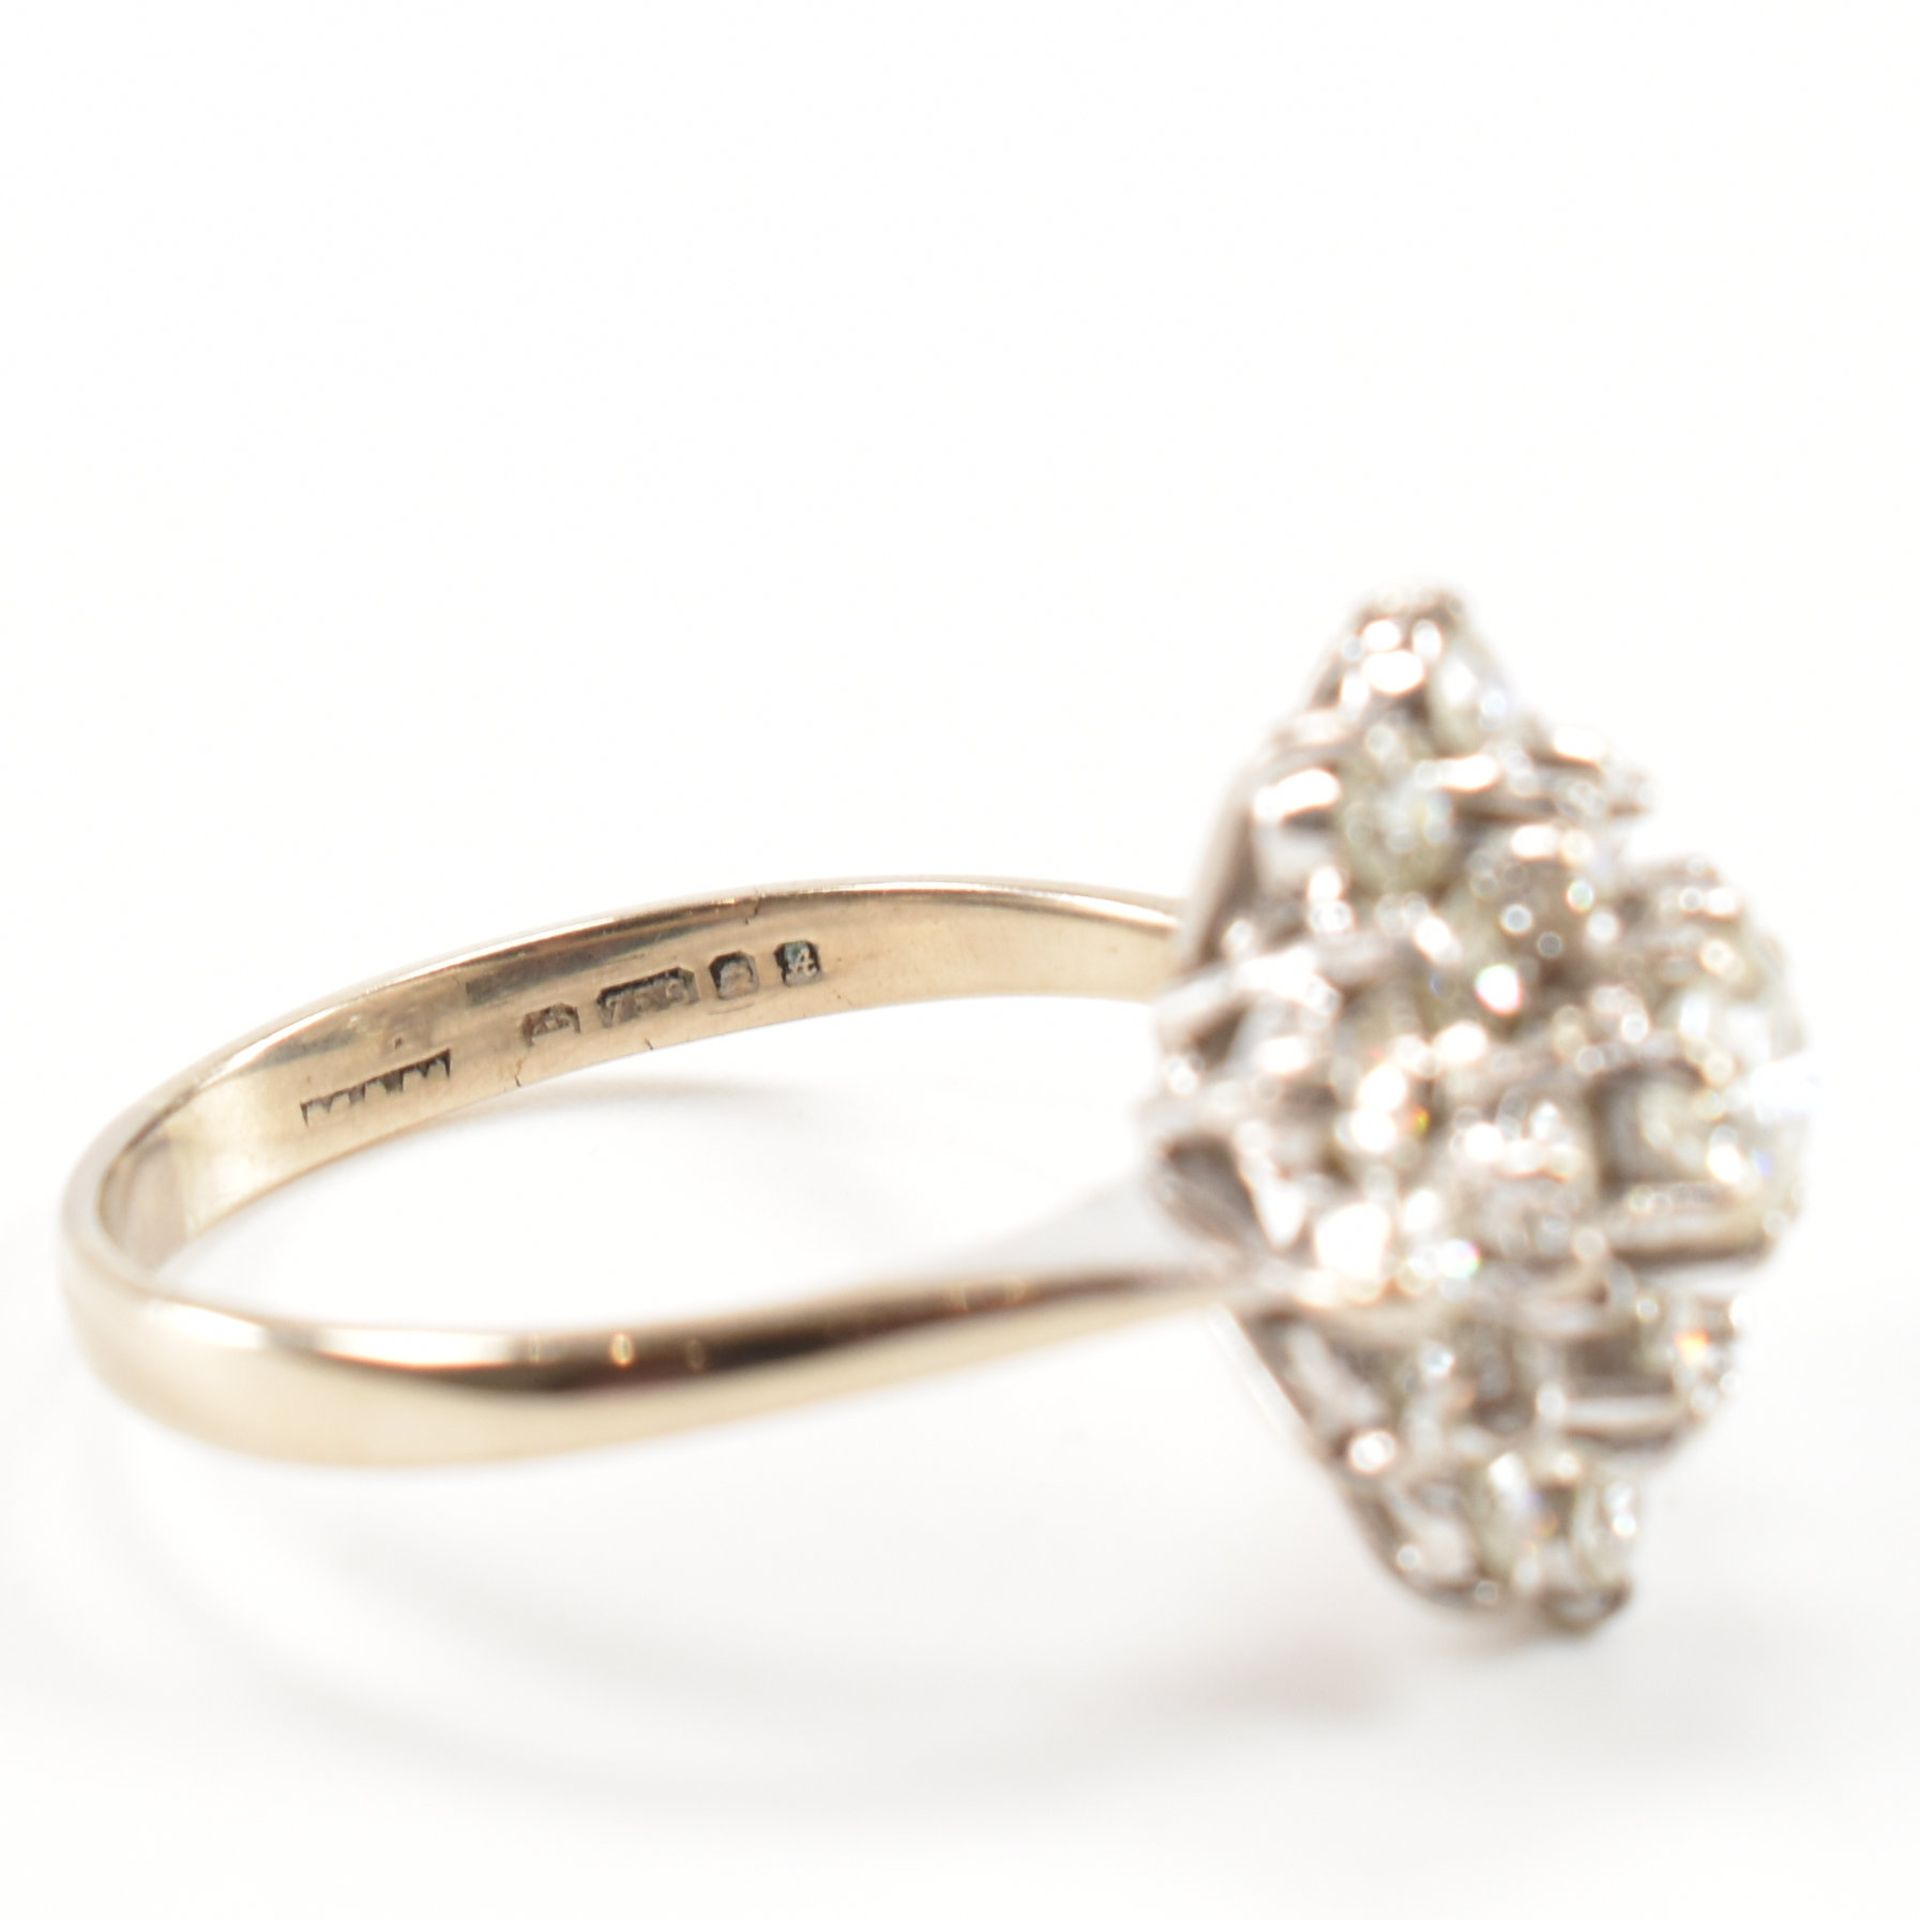 HALLMARKED 18CT GOLD & DIAMOND CLUSTER RING - Image 7 of 9